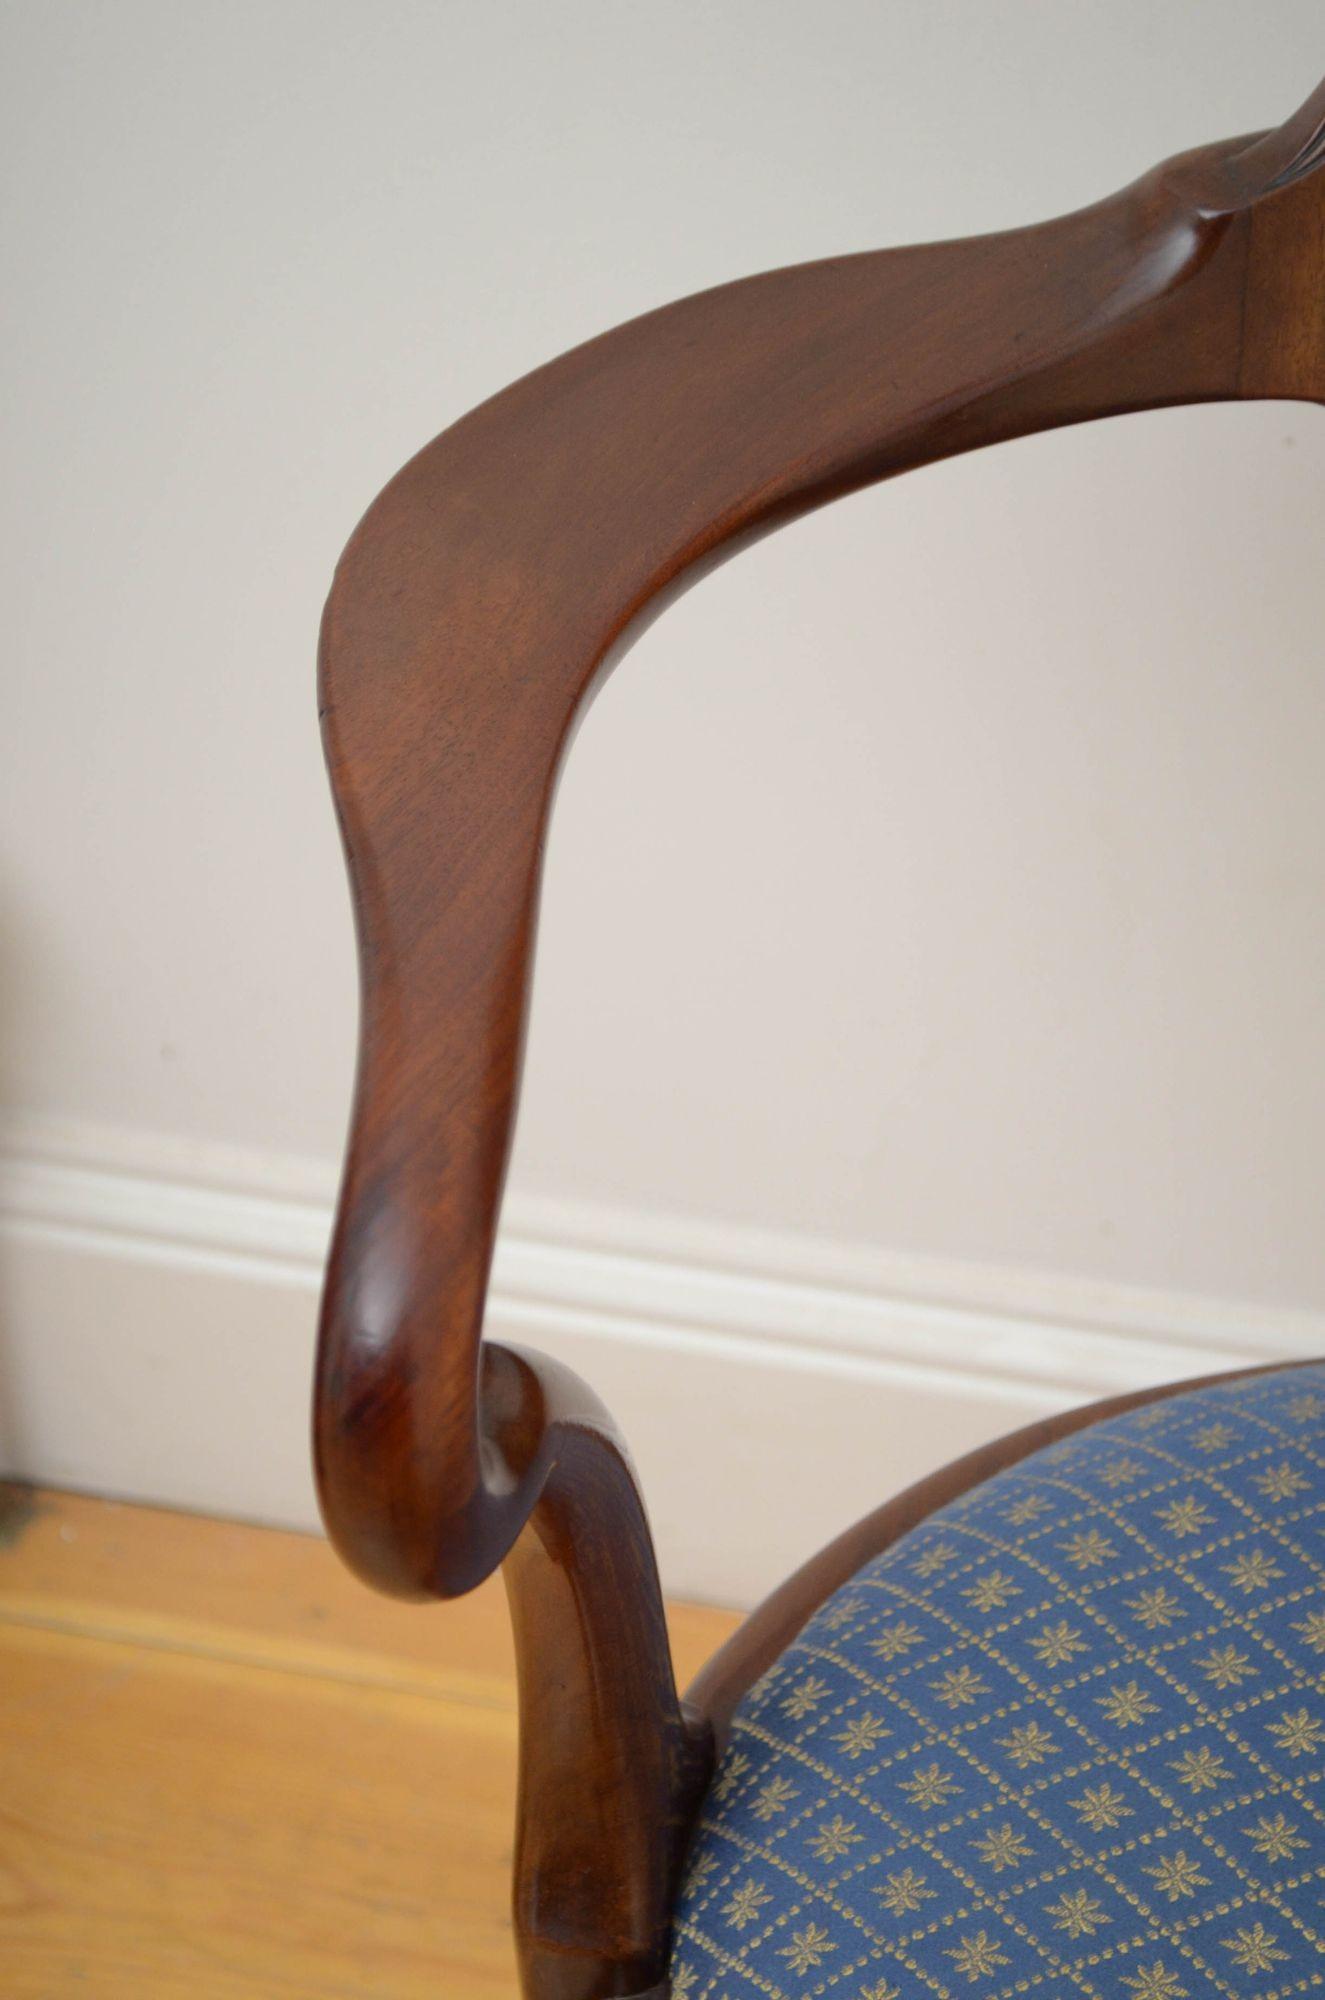 Early 20th century Gillows Design Chair in Mahogany For Sale 2